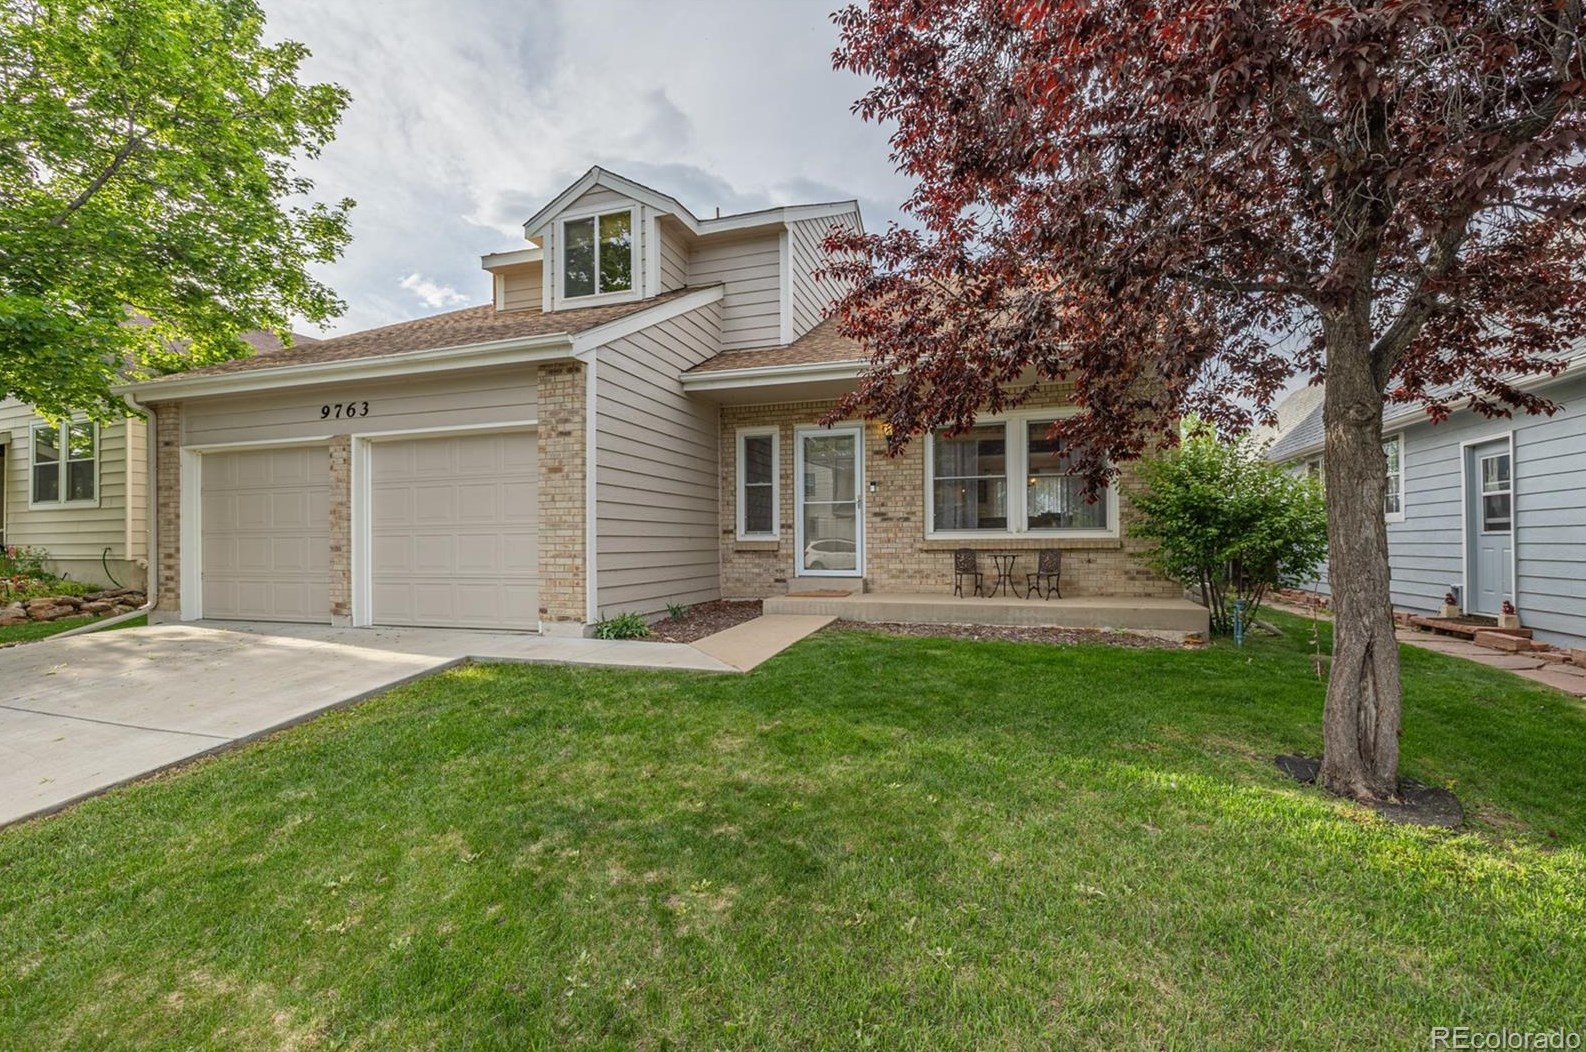 9763 83rd Ave, Arvada, CO 80005